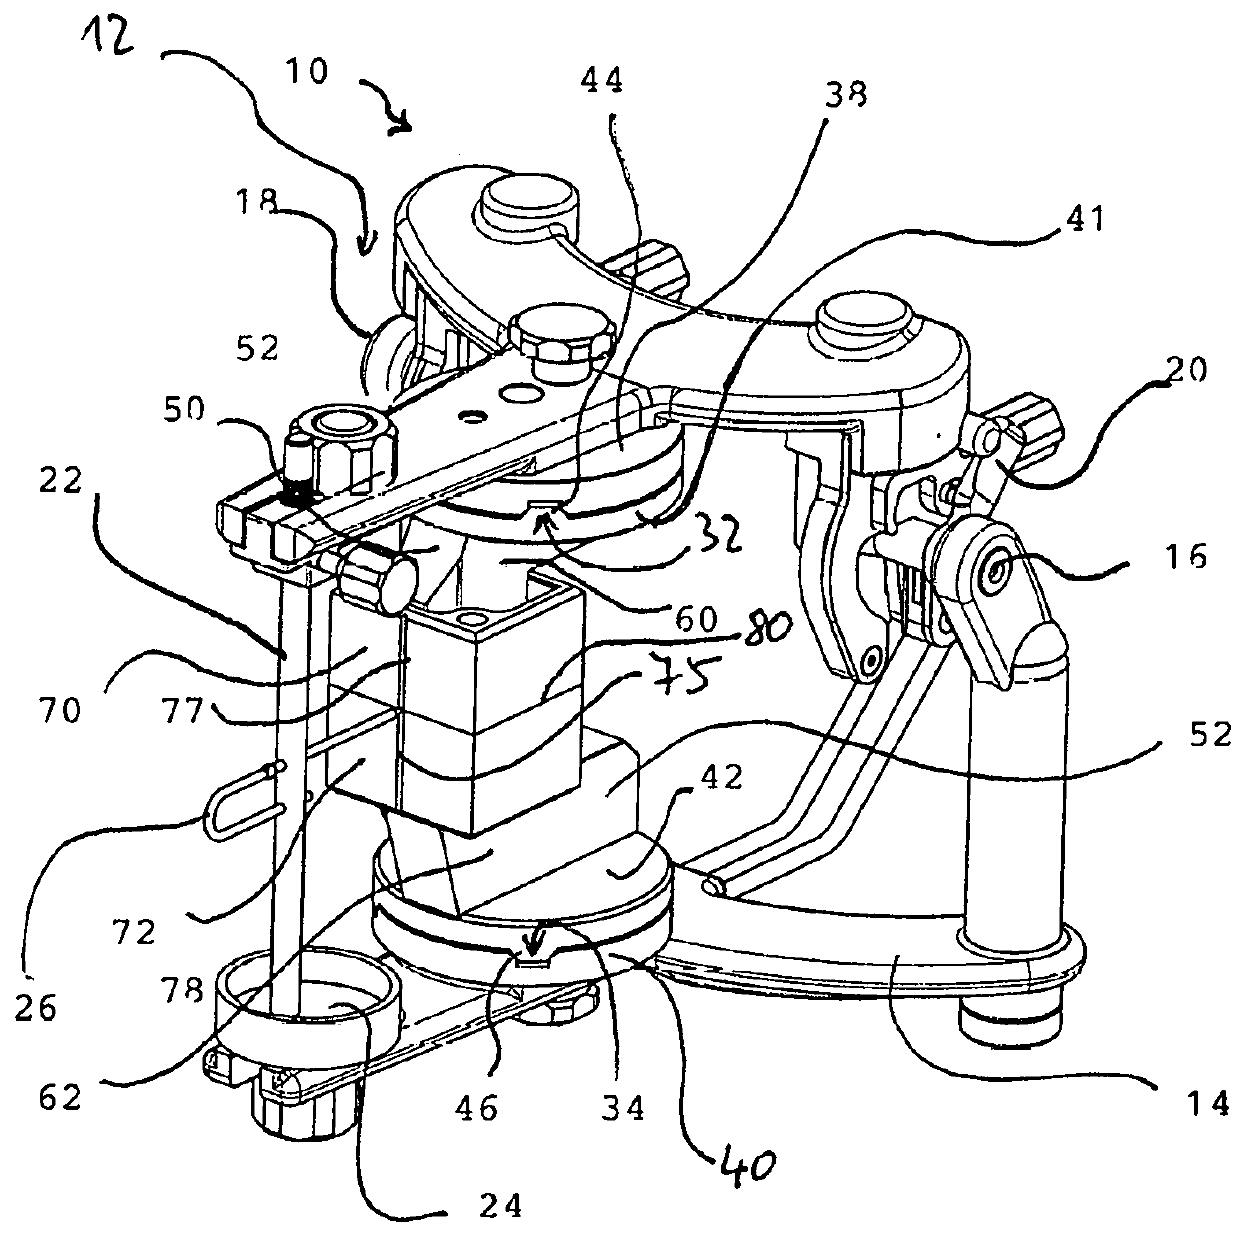 Articulator And Articulator Auxiliary Device